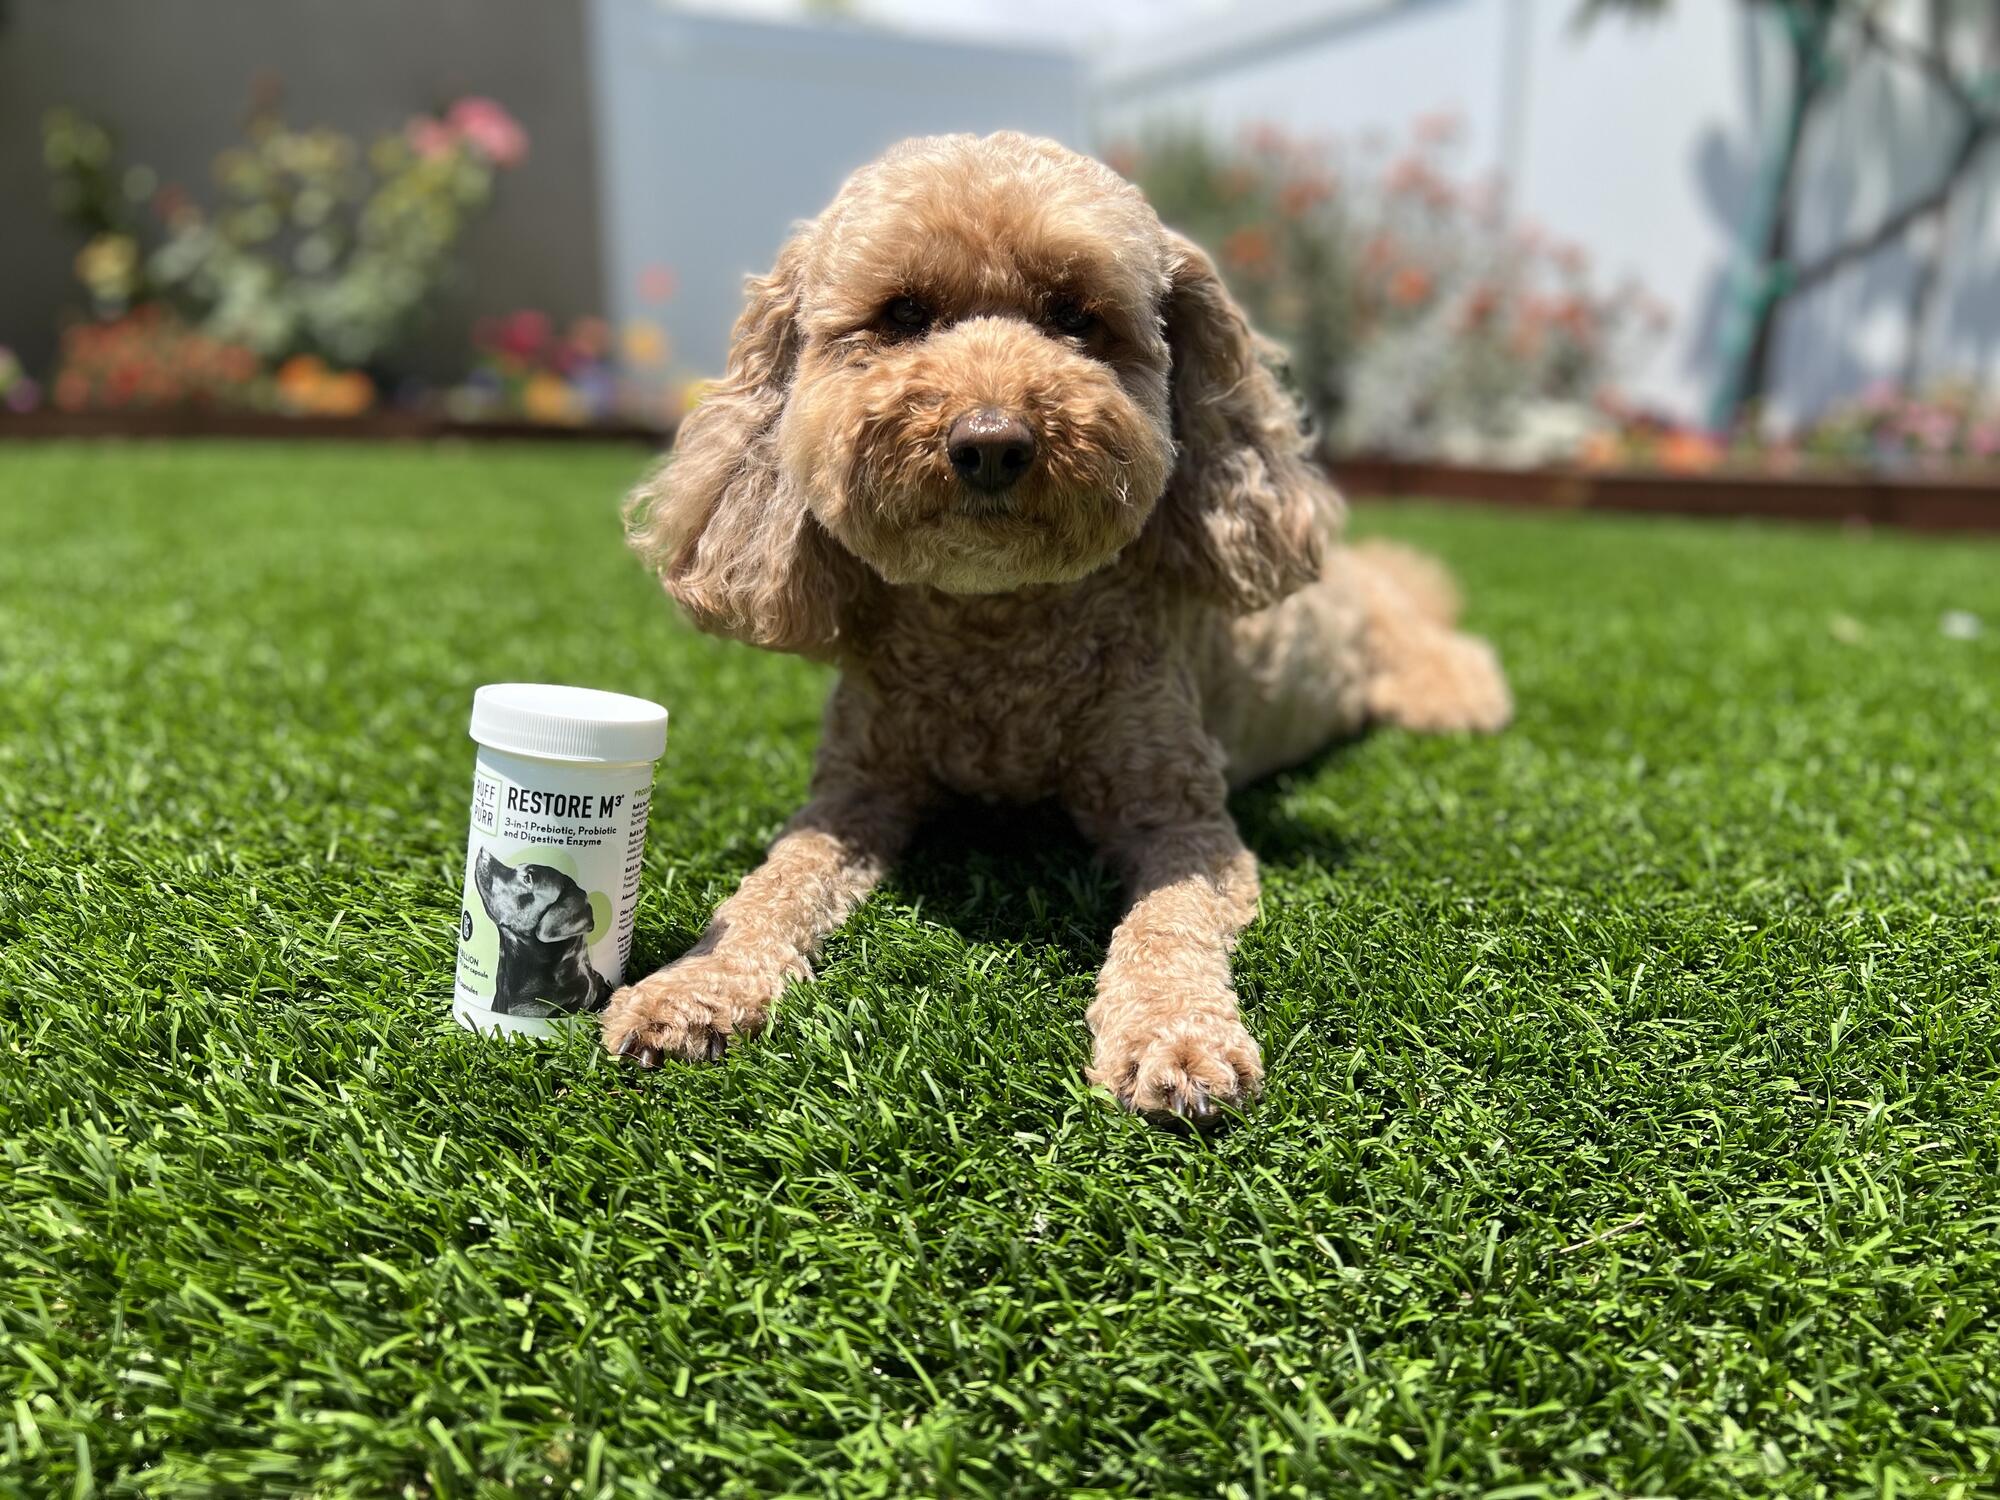 Medium sized Golden Doodle dog on astroturf lawn with bottle of Restore M3®